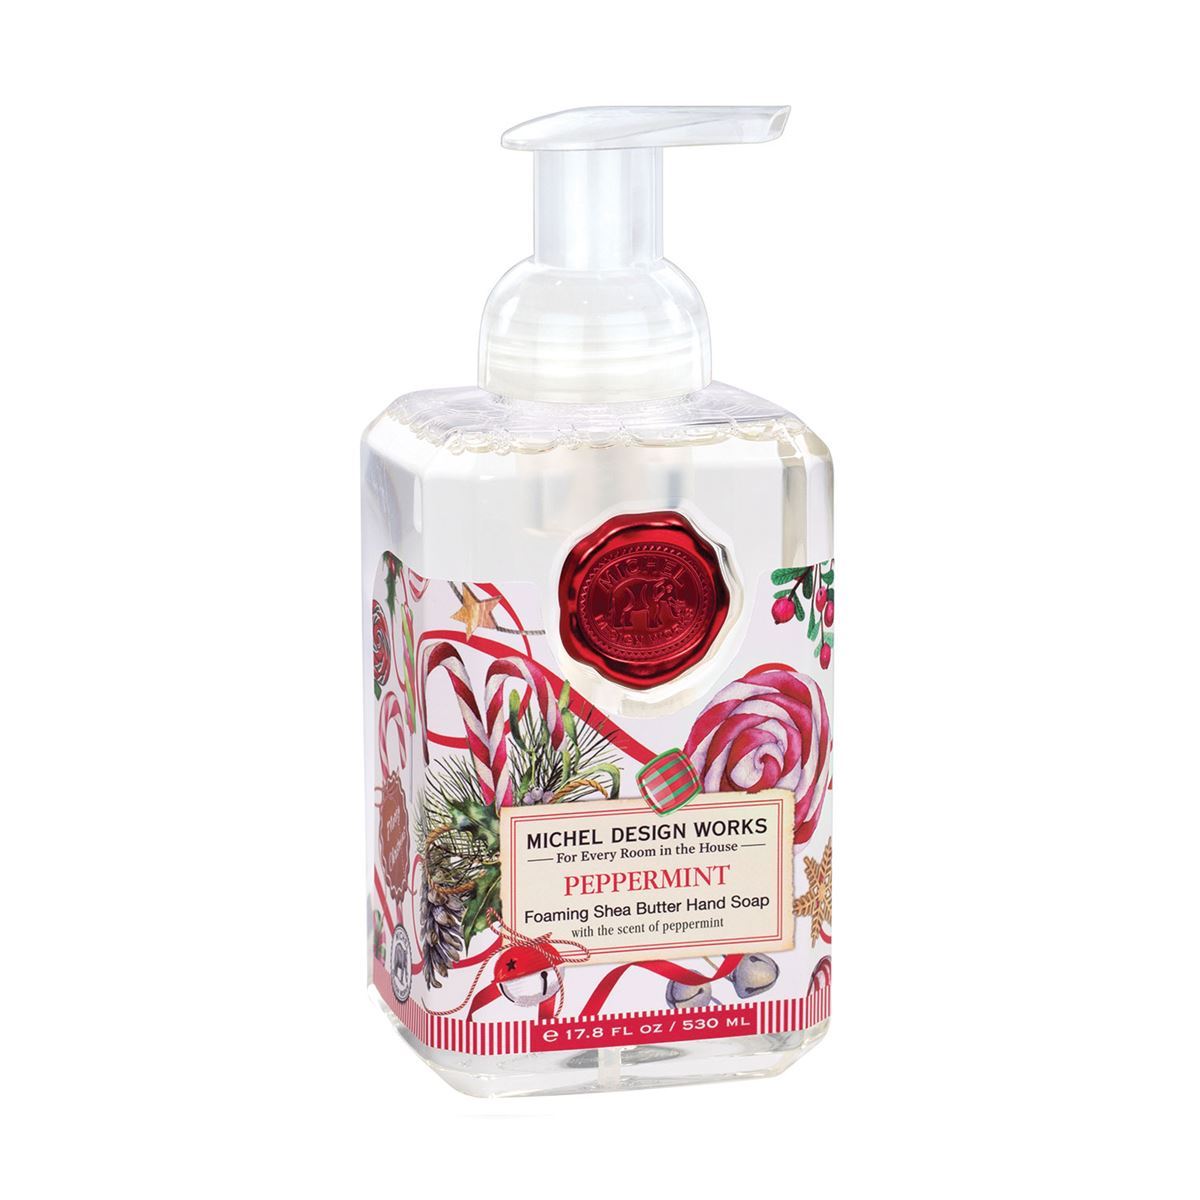 Michel Design Works Peppermint Foaming Soap by Michel Design Works at depeche-toi